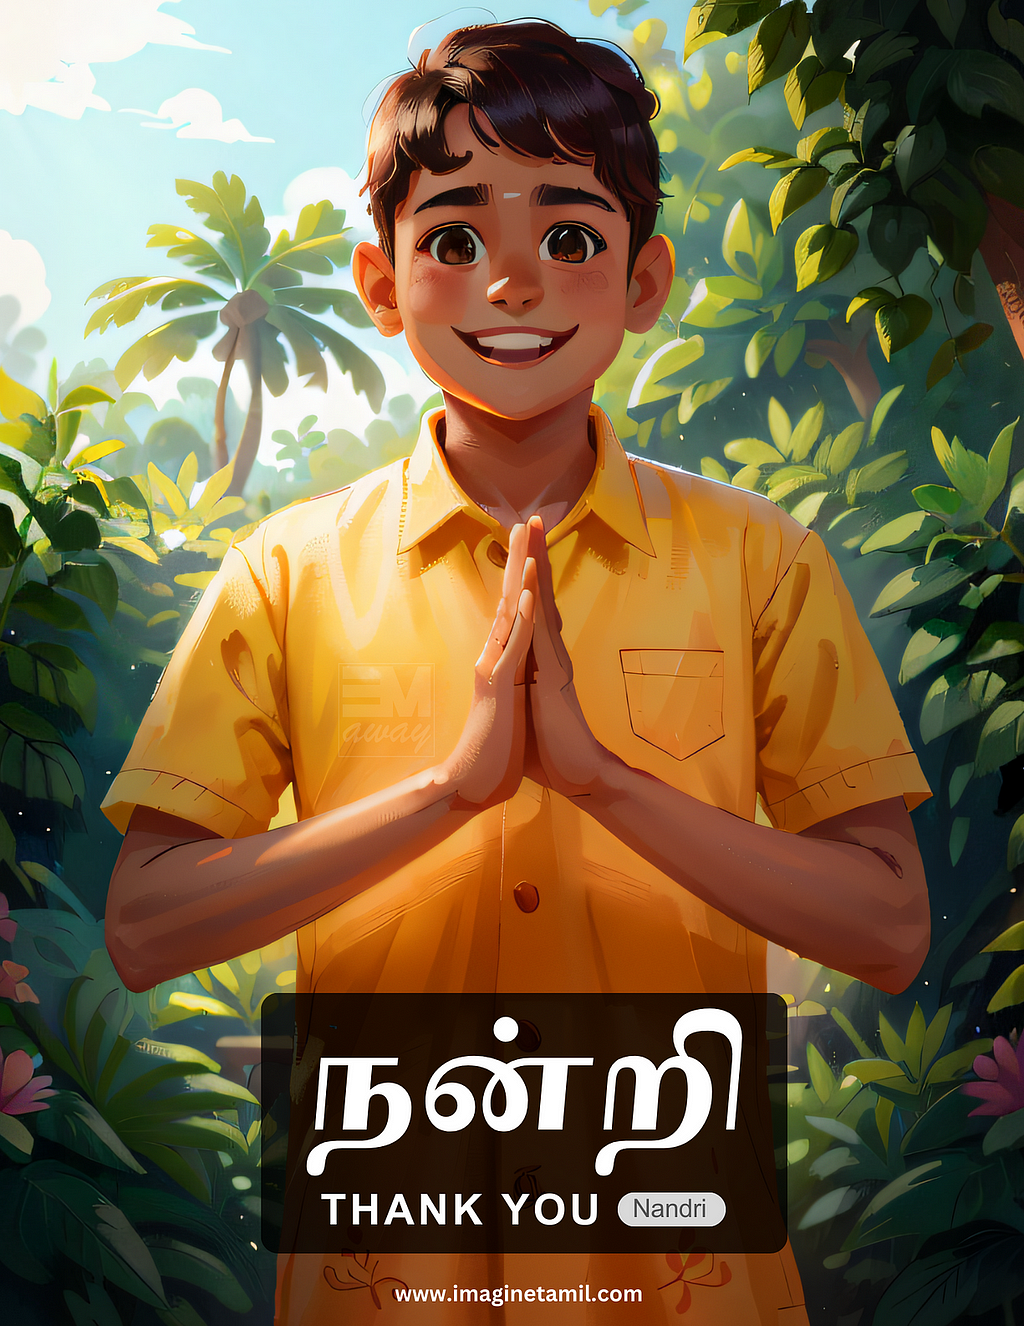 Thank you in Tamil, A Tamil kid giving Vanakkam pose